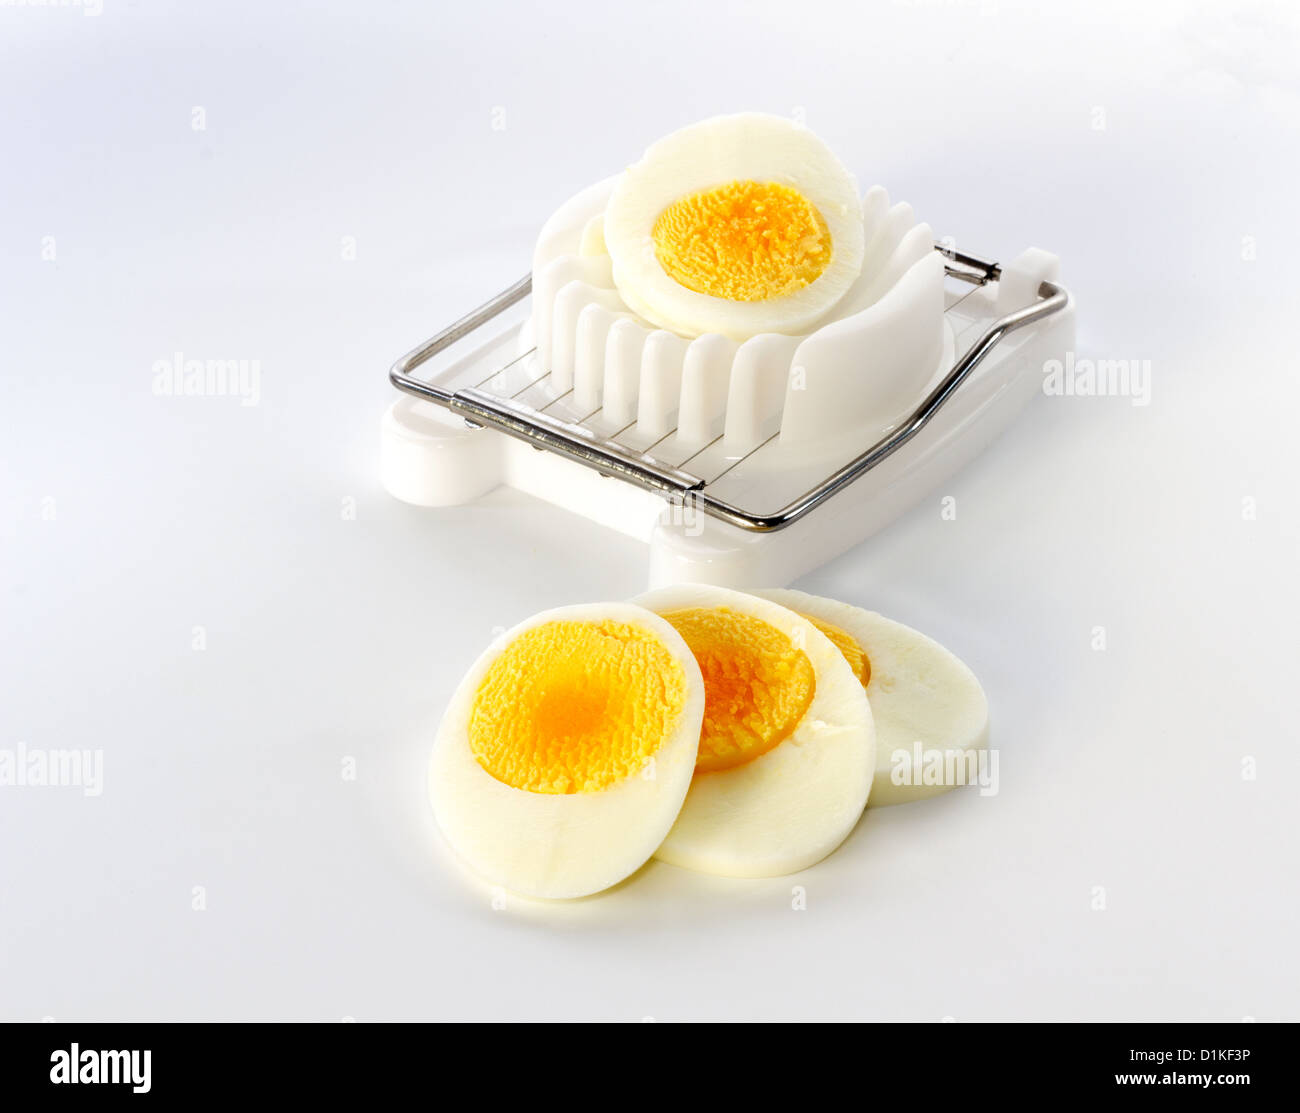 https://c8.alamy.com/comp/D1KF3P/an-white-egg-slicer-with-half-an-egg-and-a-few-slices-in-front-D1KF3P.jpg